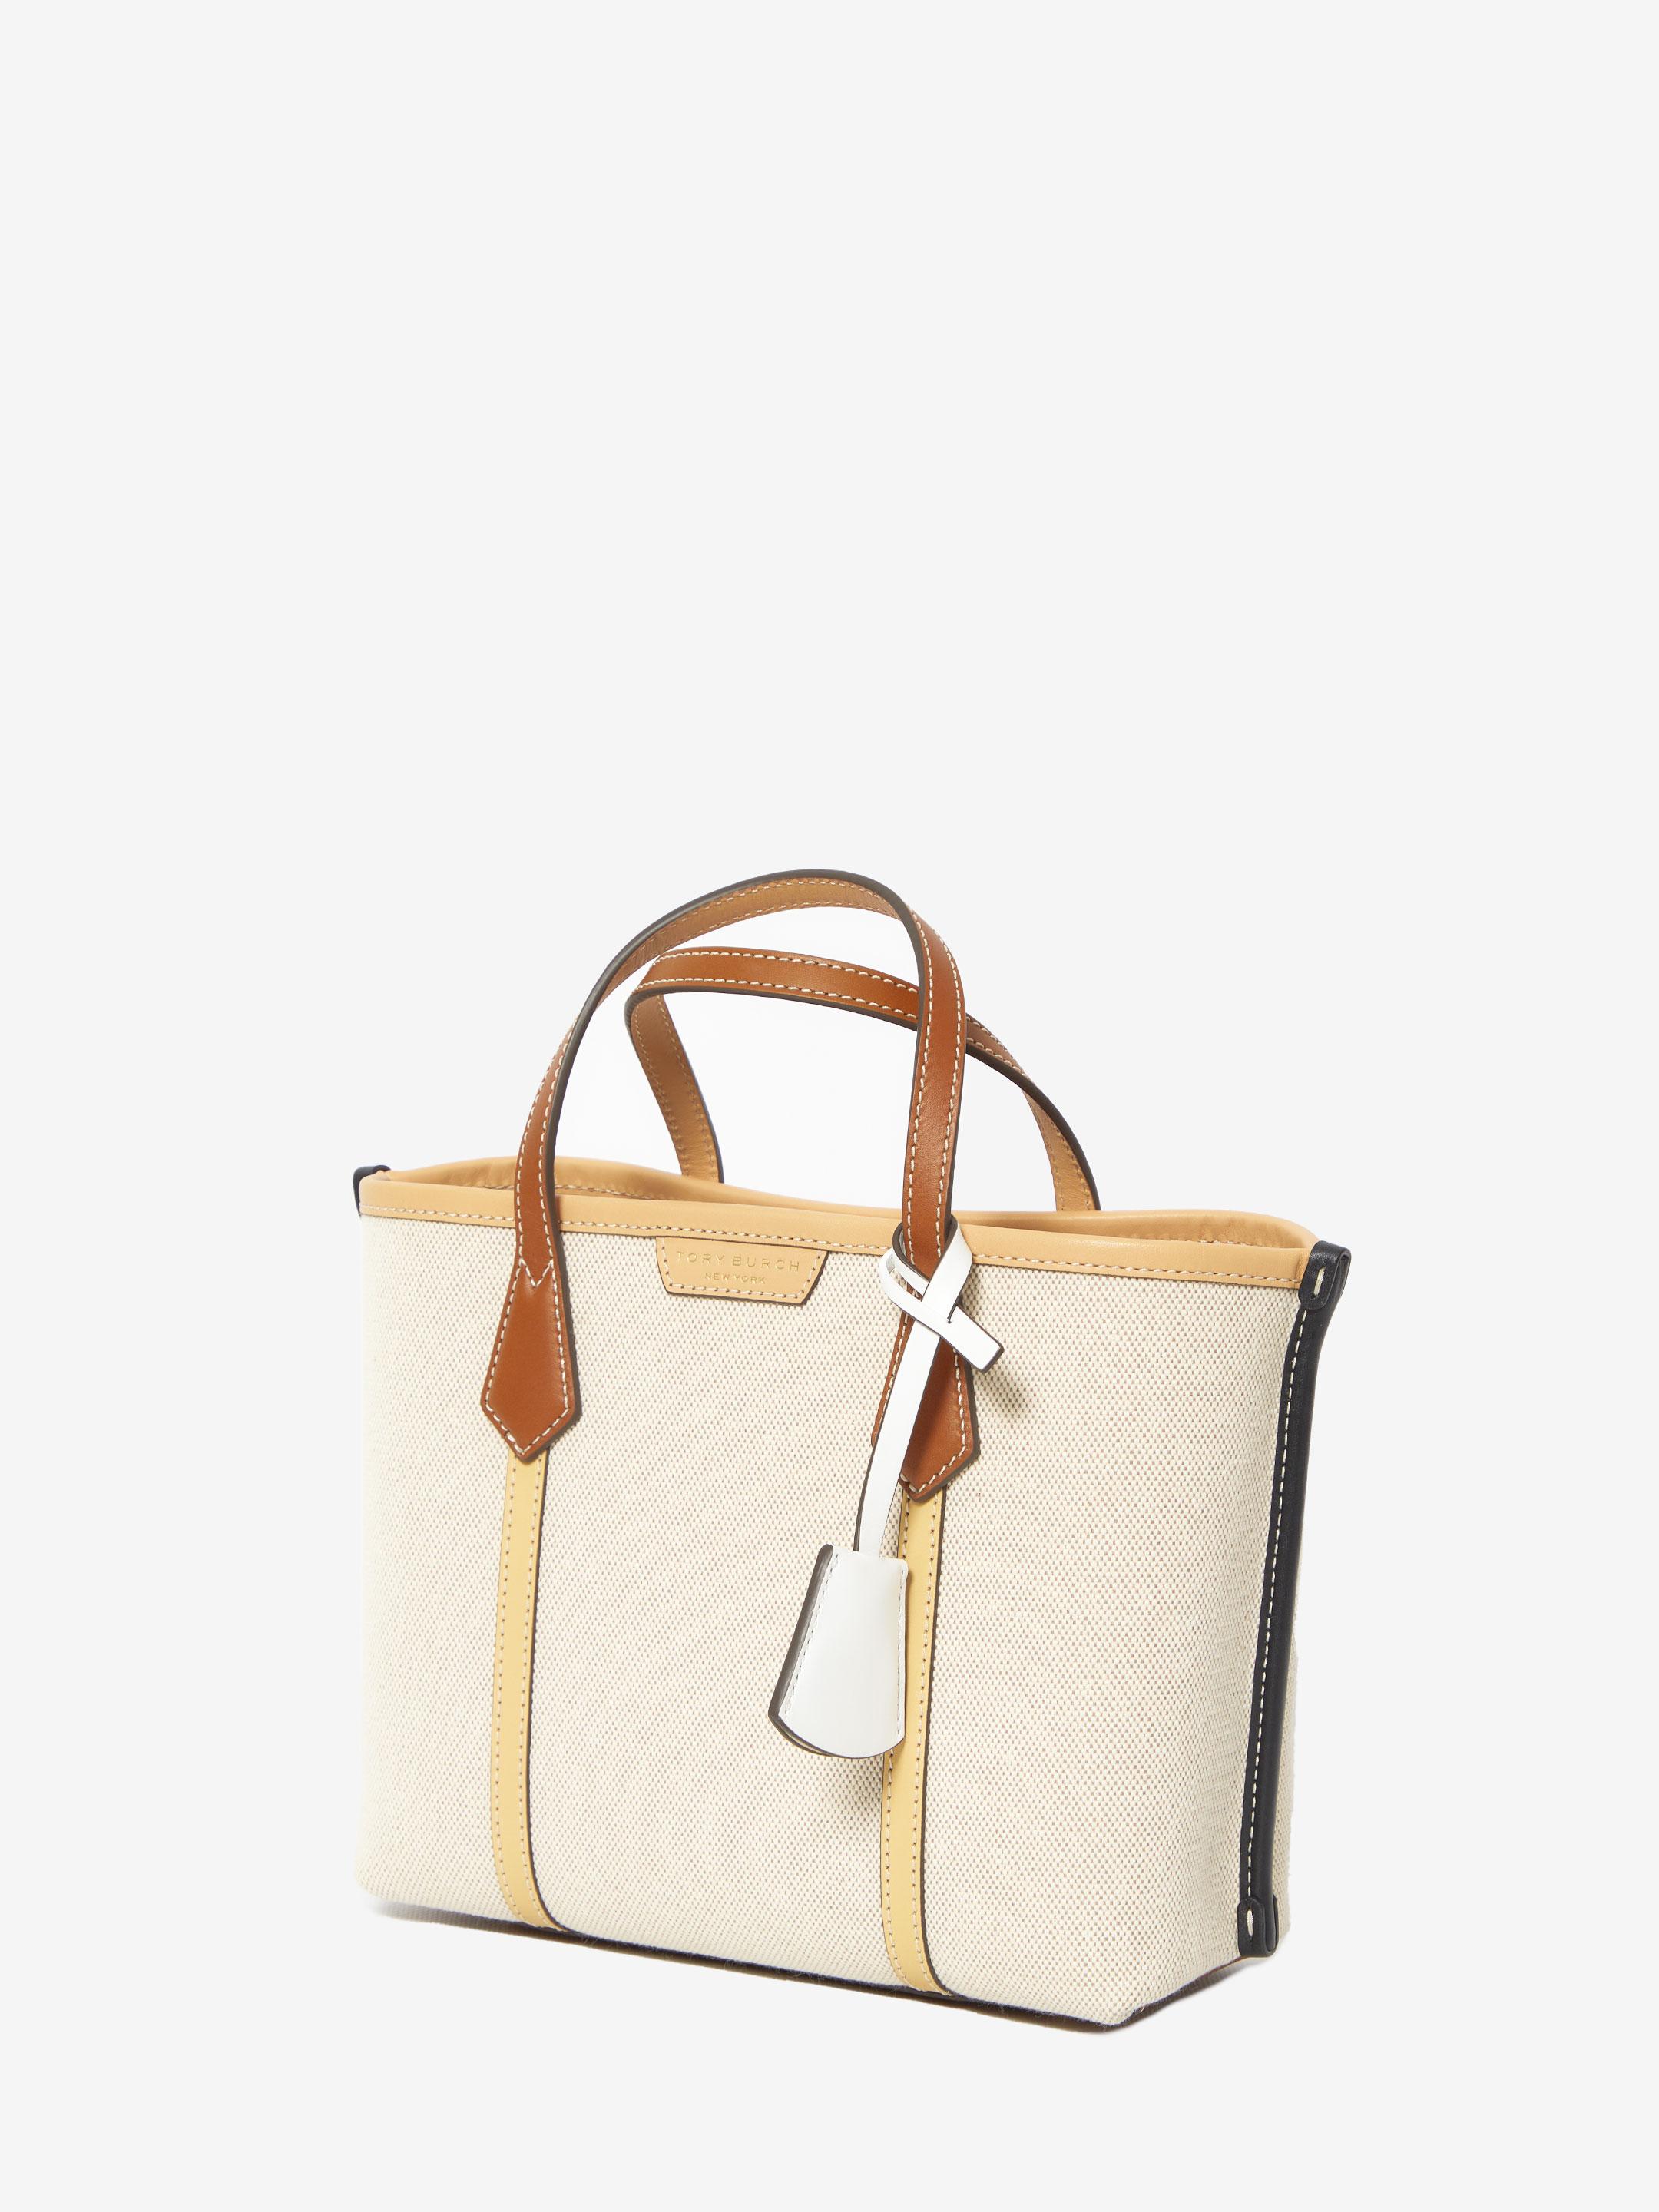 Tory Burch Leather Trim Coated Canvas Tote Bag - Neutrals Totes